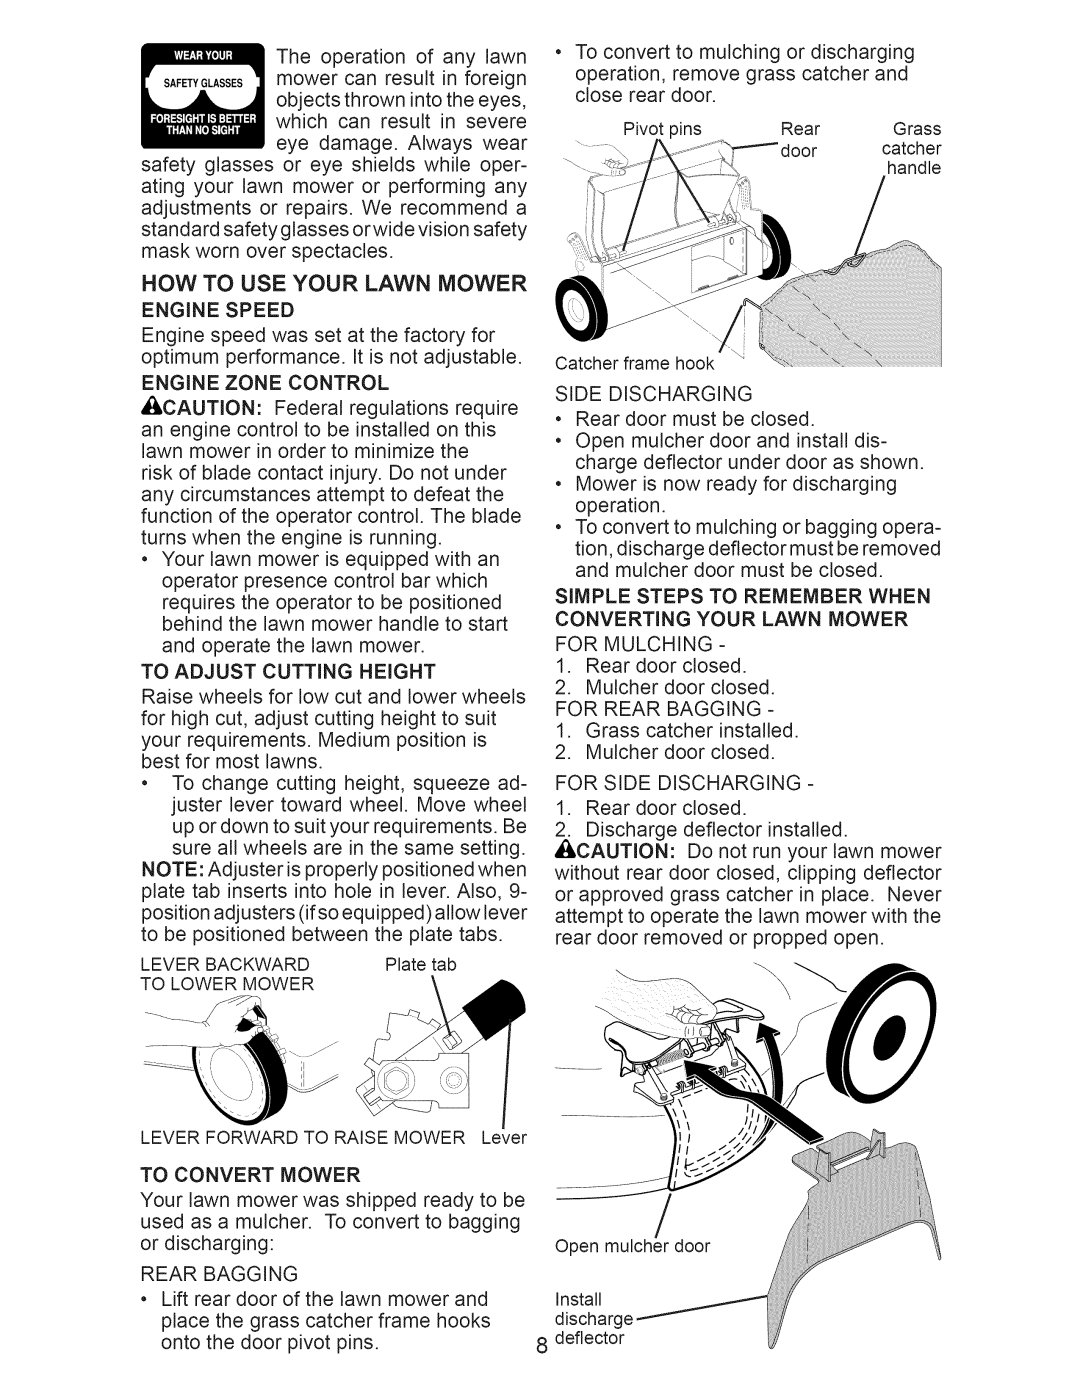 Craftsman 917.389061 owner manual How To Use Your Lawn Mower, Converting Your Lawn Mower 